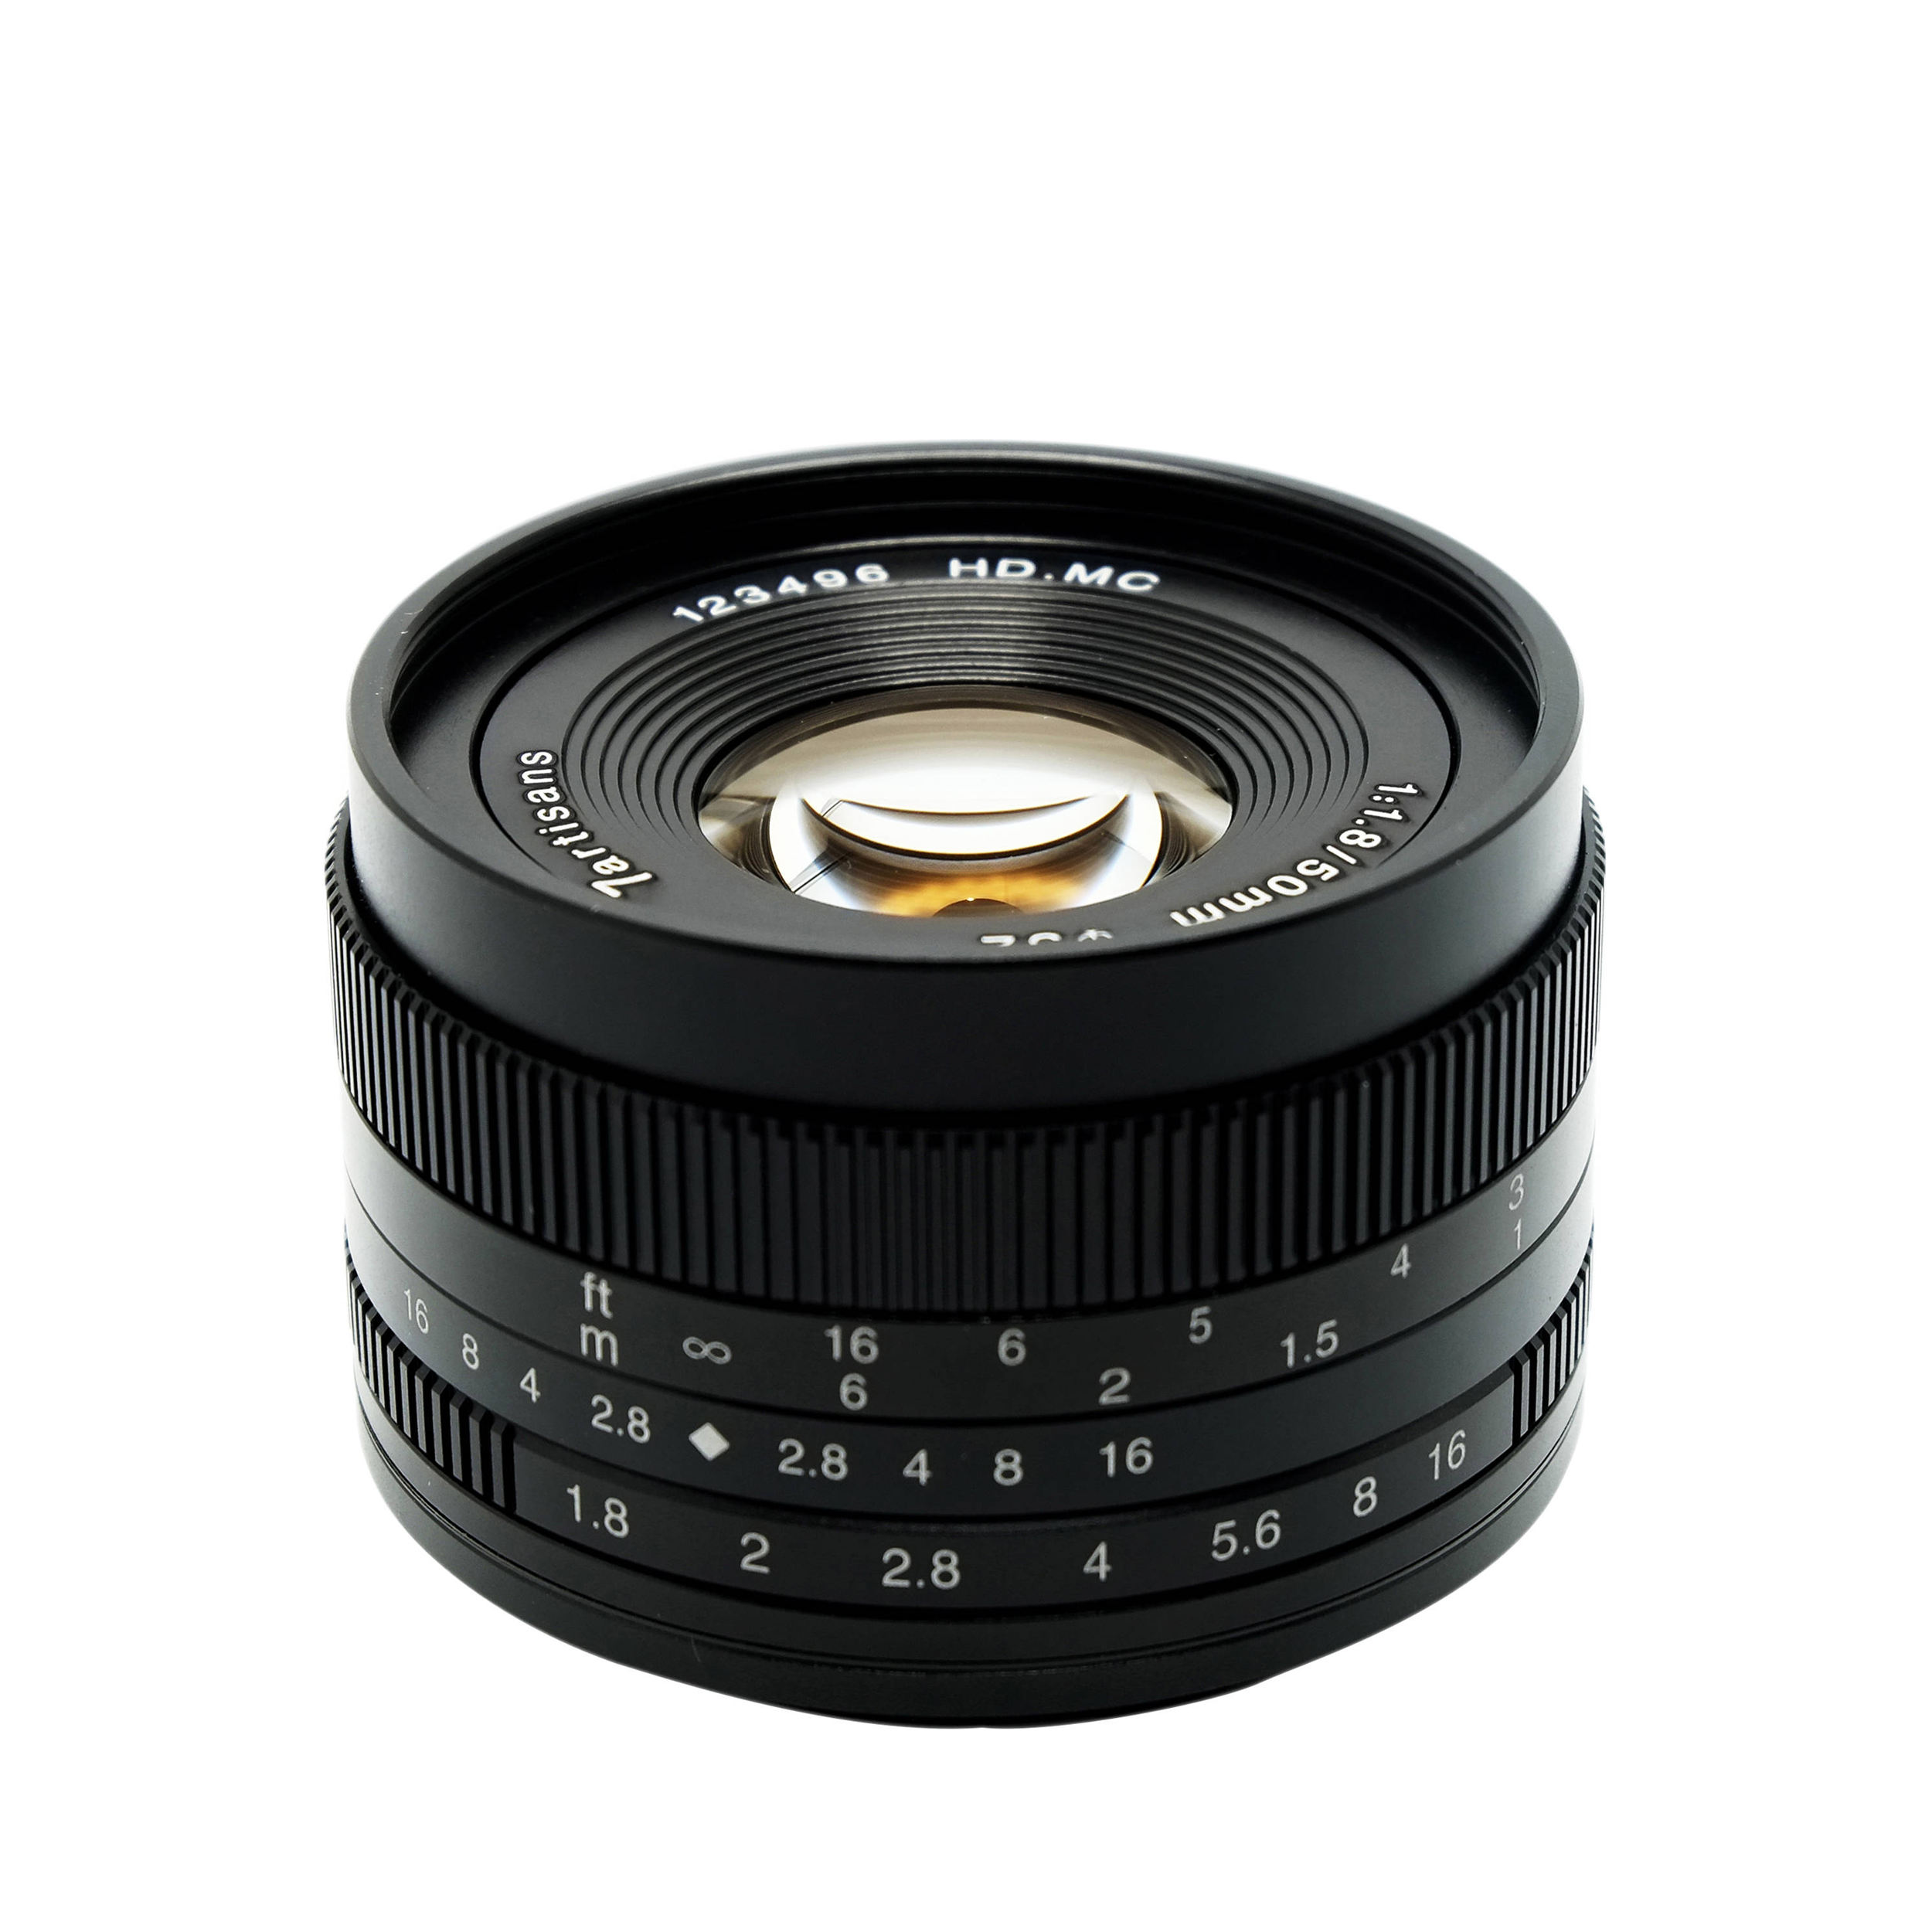 7artisans Photoelectric 50mm f/1.8 Lens for Micro Four Thirds Mount